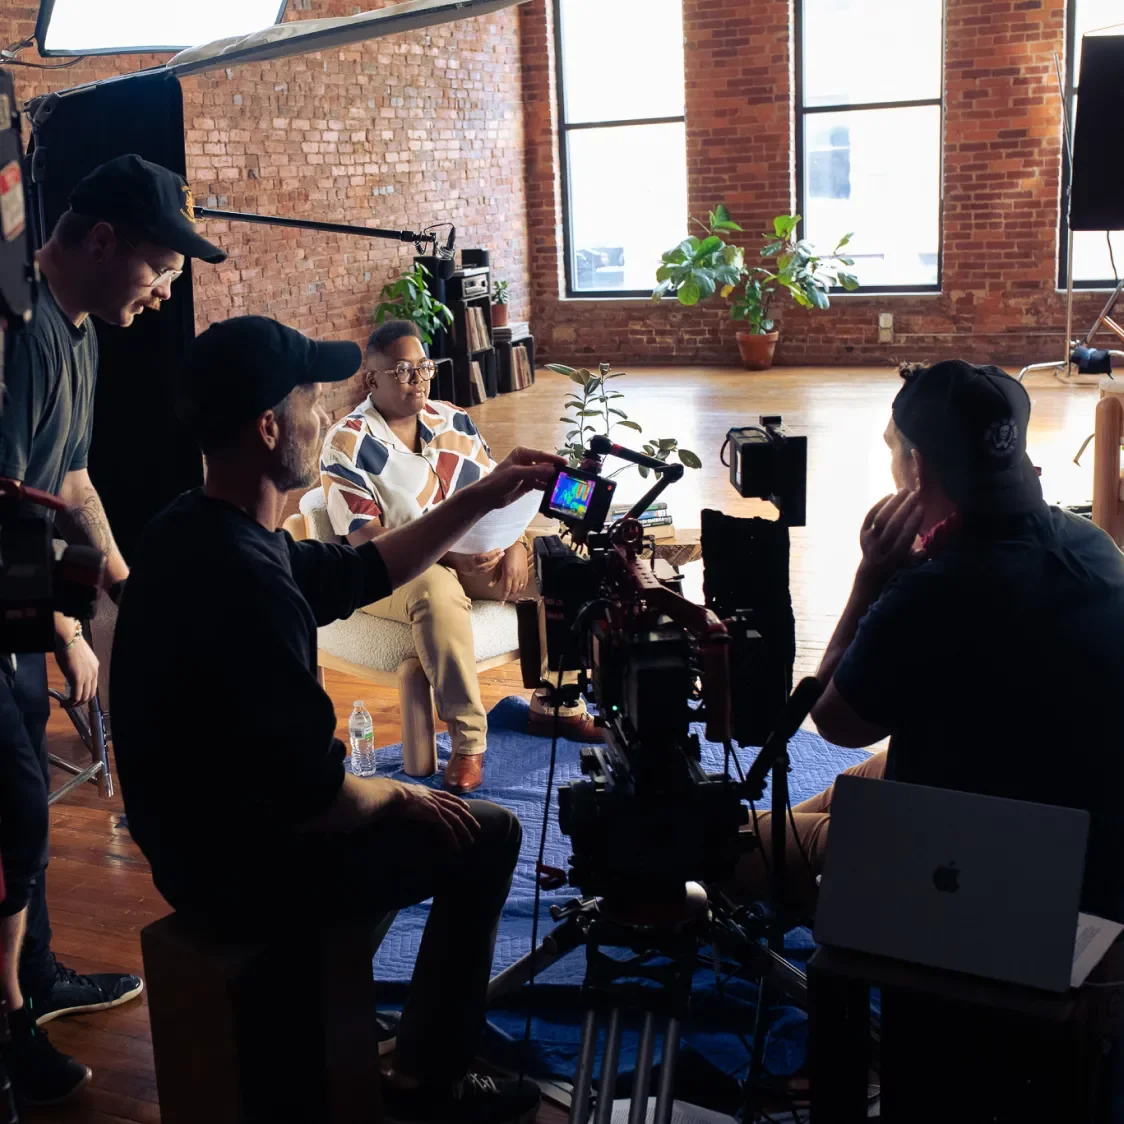 Behind the scenes of the shoot, showing the crew preparing to film Dorothy Height